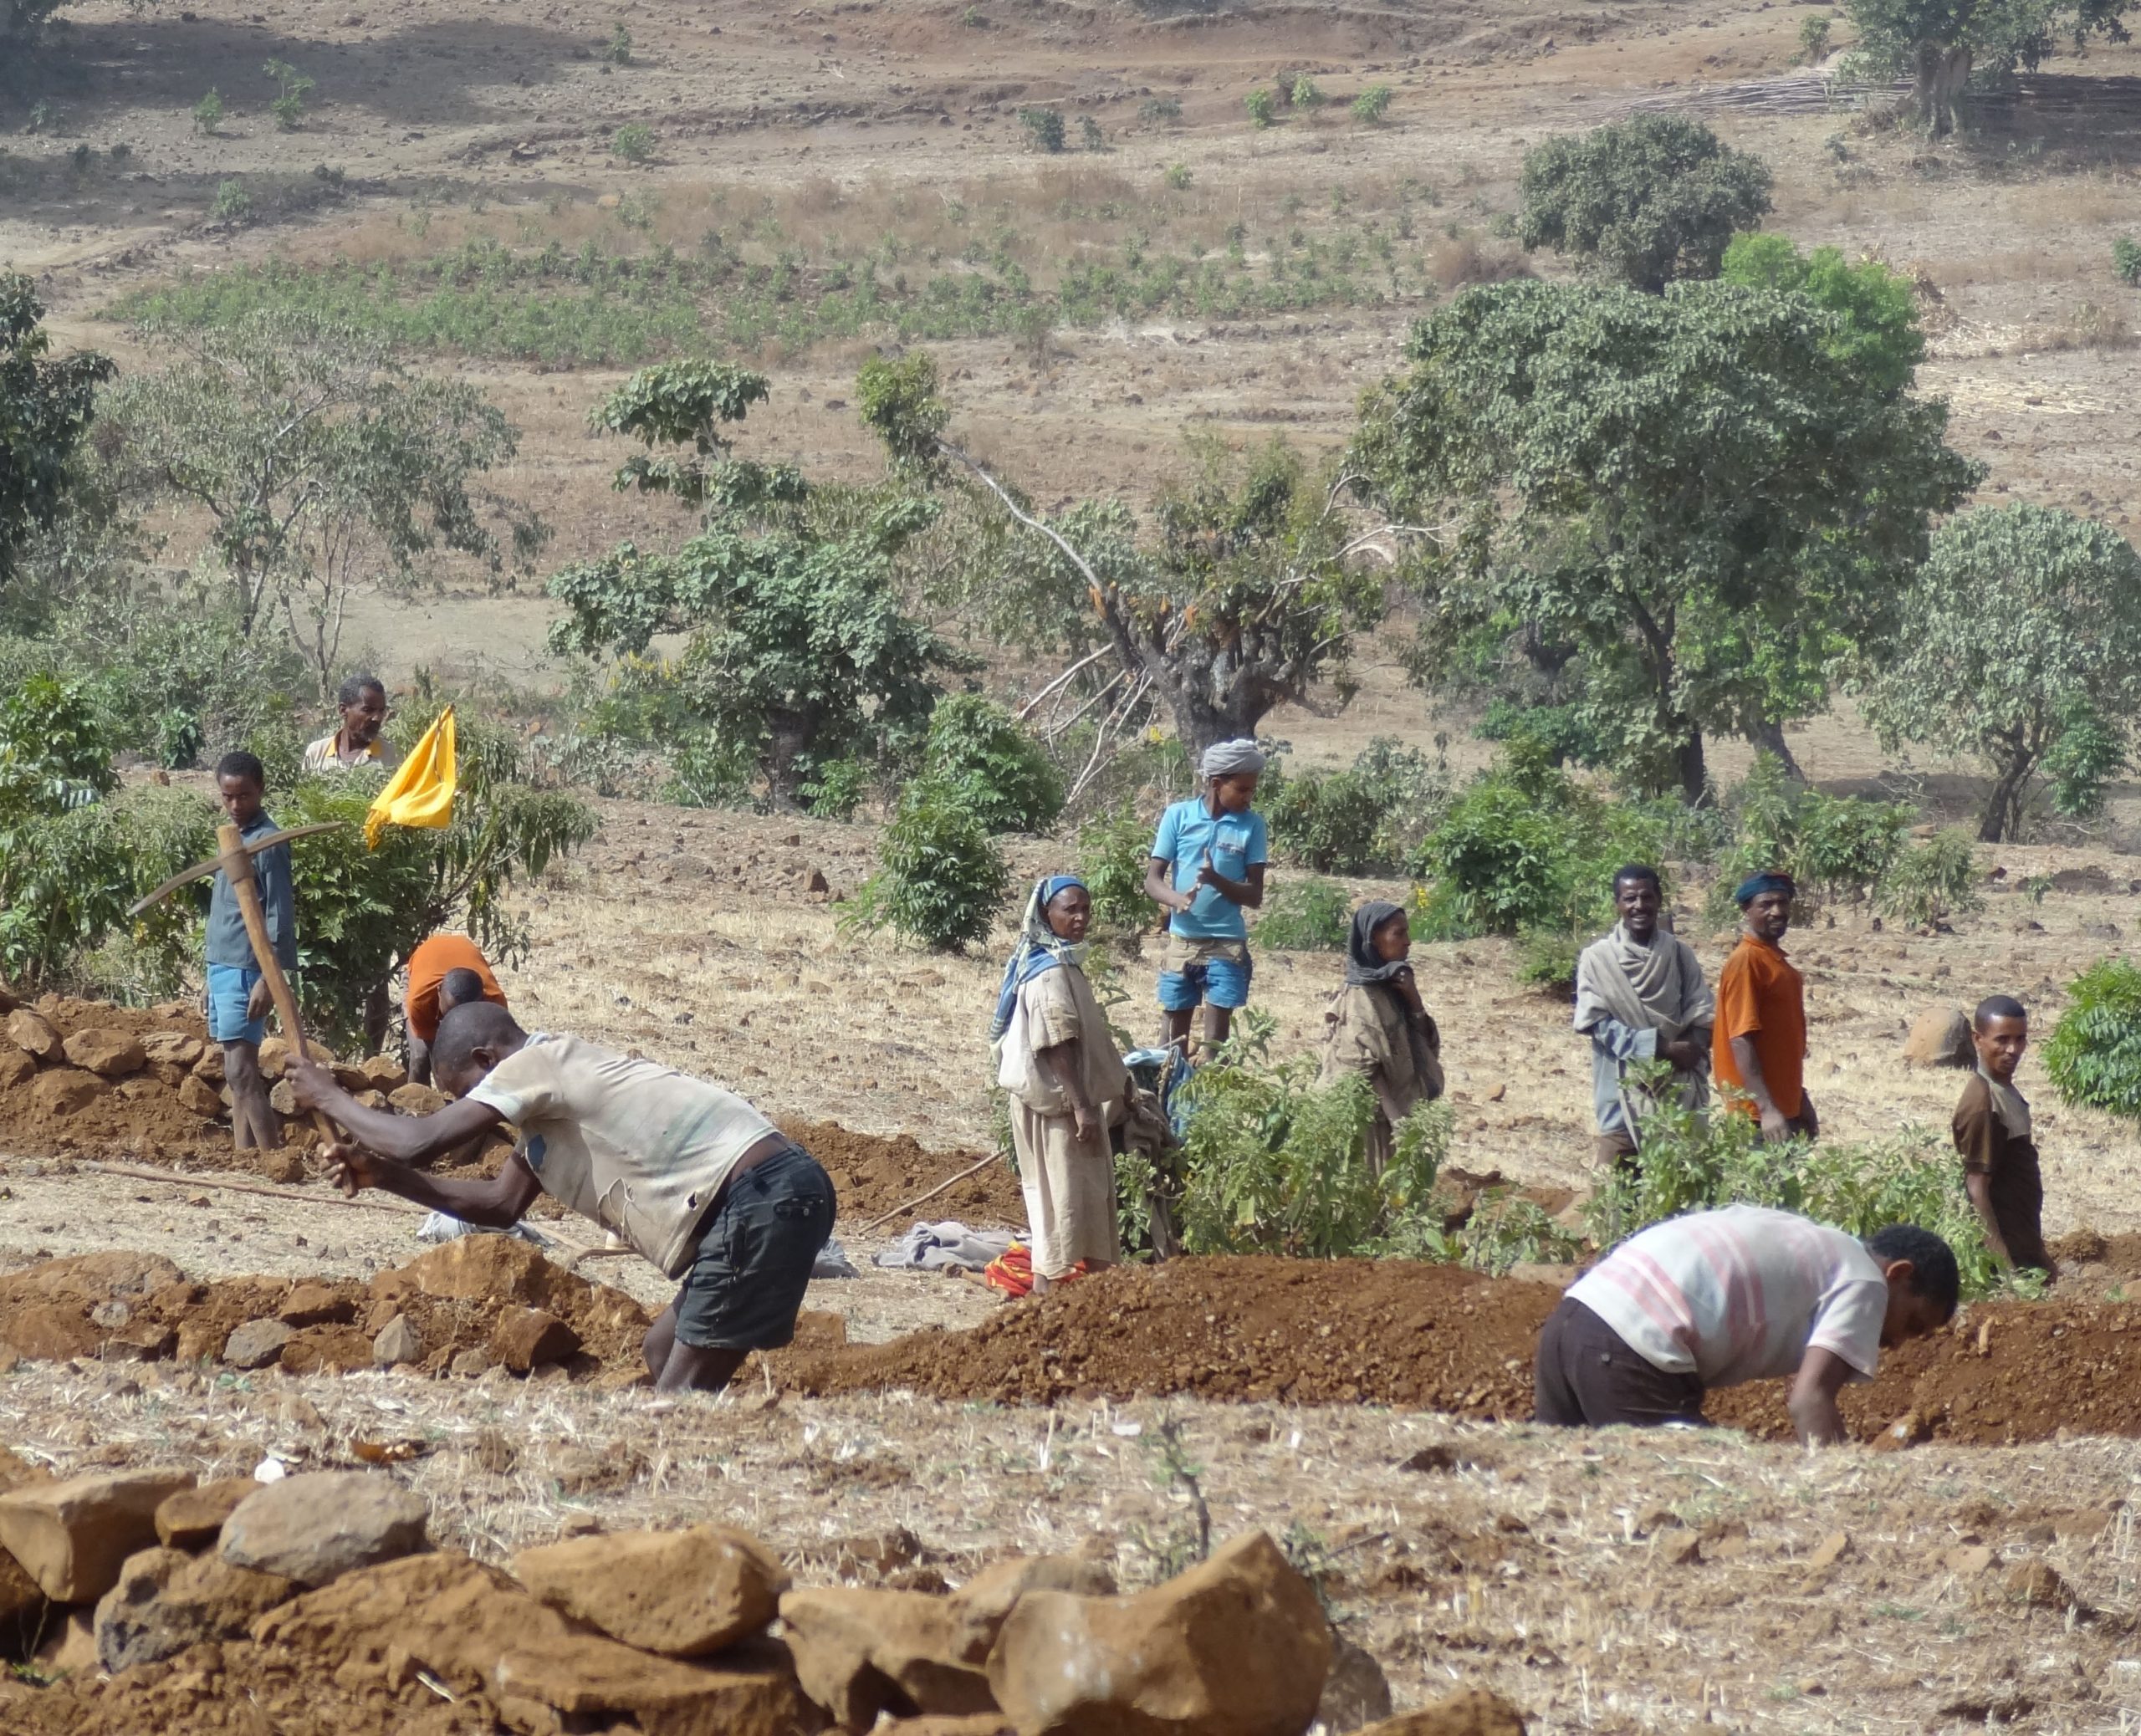 A collective effort to counter soil erosion and enhance soil fertility on sloping farmland in the Ethiopian Highlands. Photo by Hans Hurni